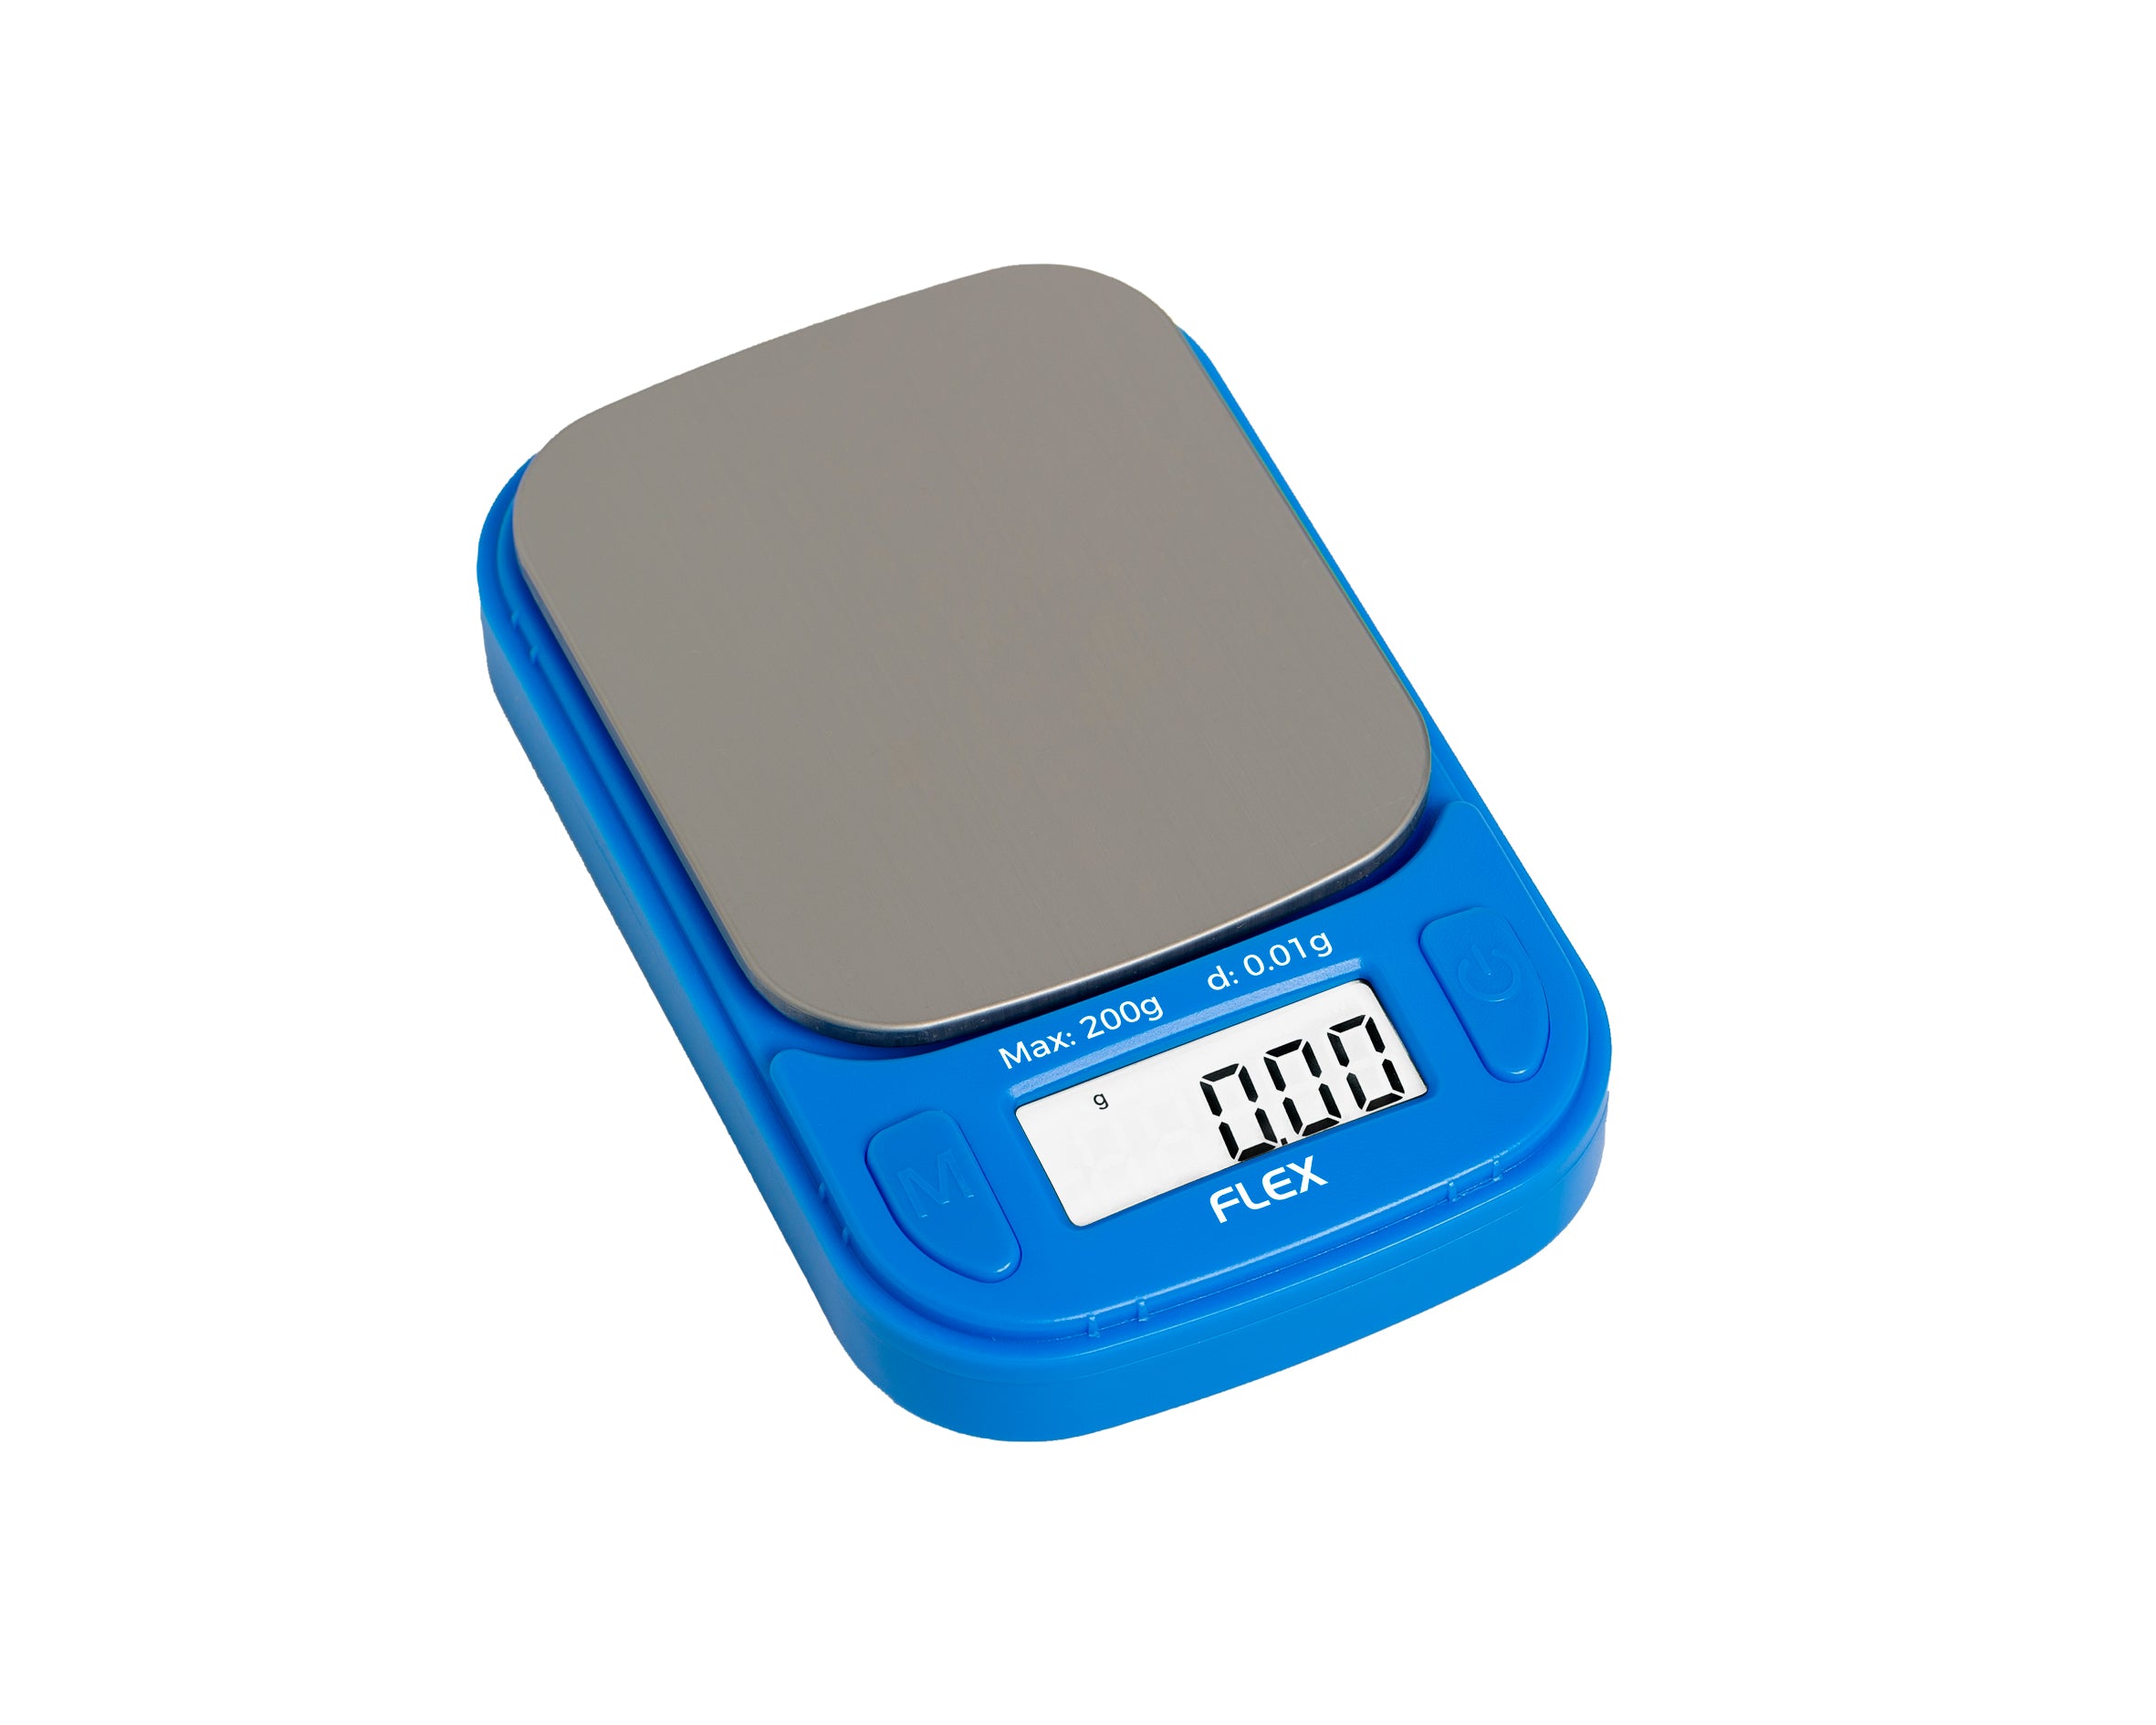 on Balance 200g X 0.01g Professional Digital LCD Mini Table Top Pocket Scale  for sale online